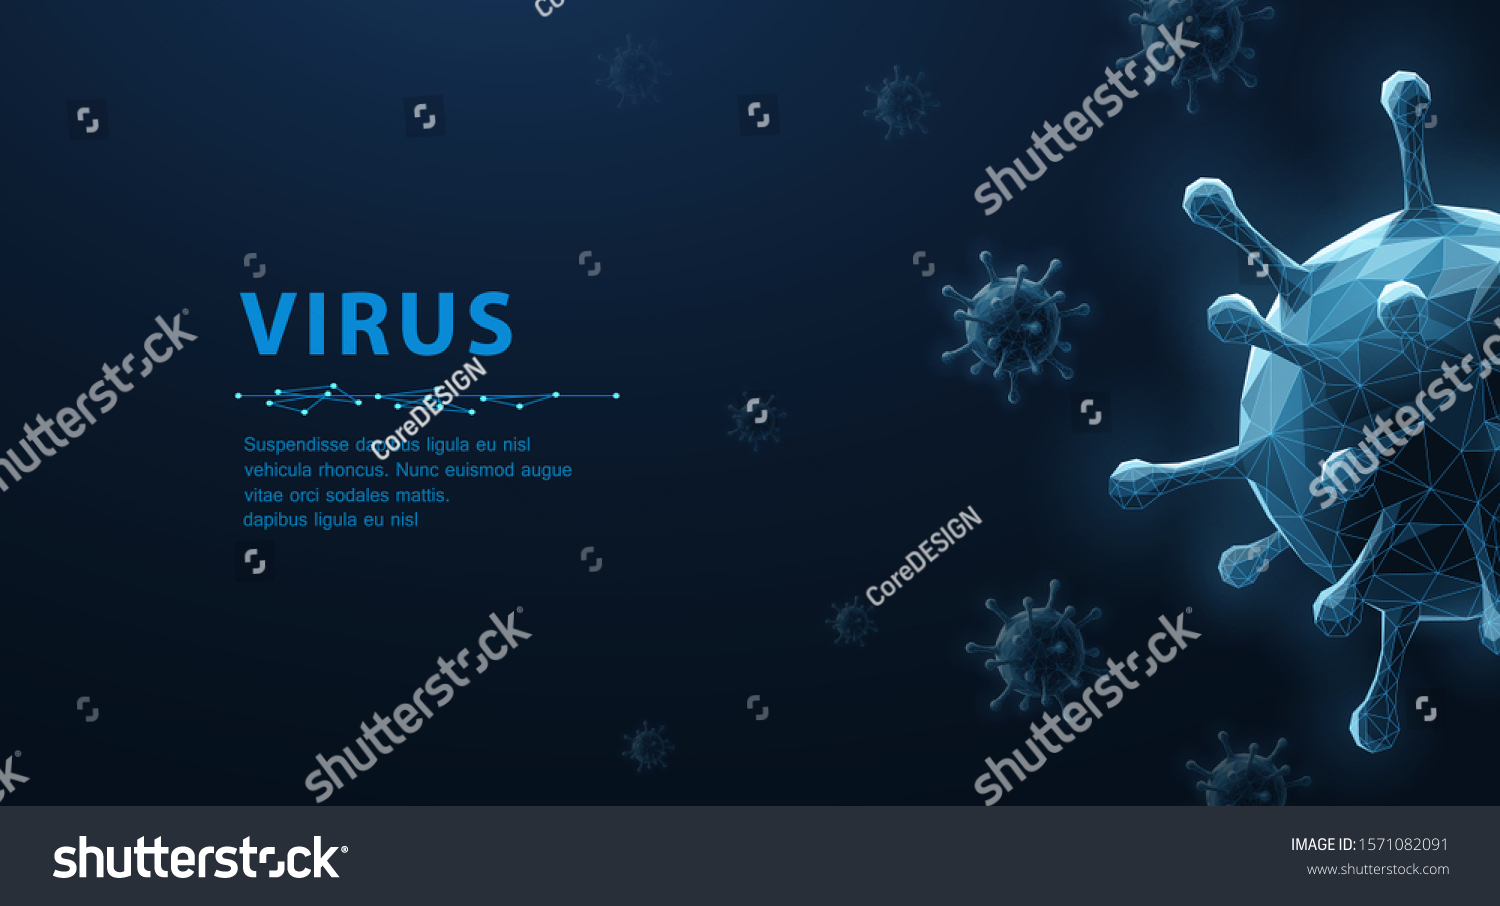 Virus. Abstract vector 3d microbe isolated on blue background. Computer virus, allergy bacteria, medical healthcare, microbiology concept. Disease germ, pathogen organism, infectious micro virology #1571082091